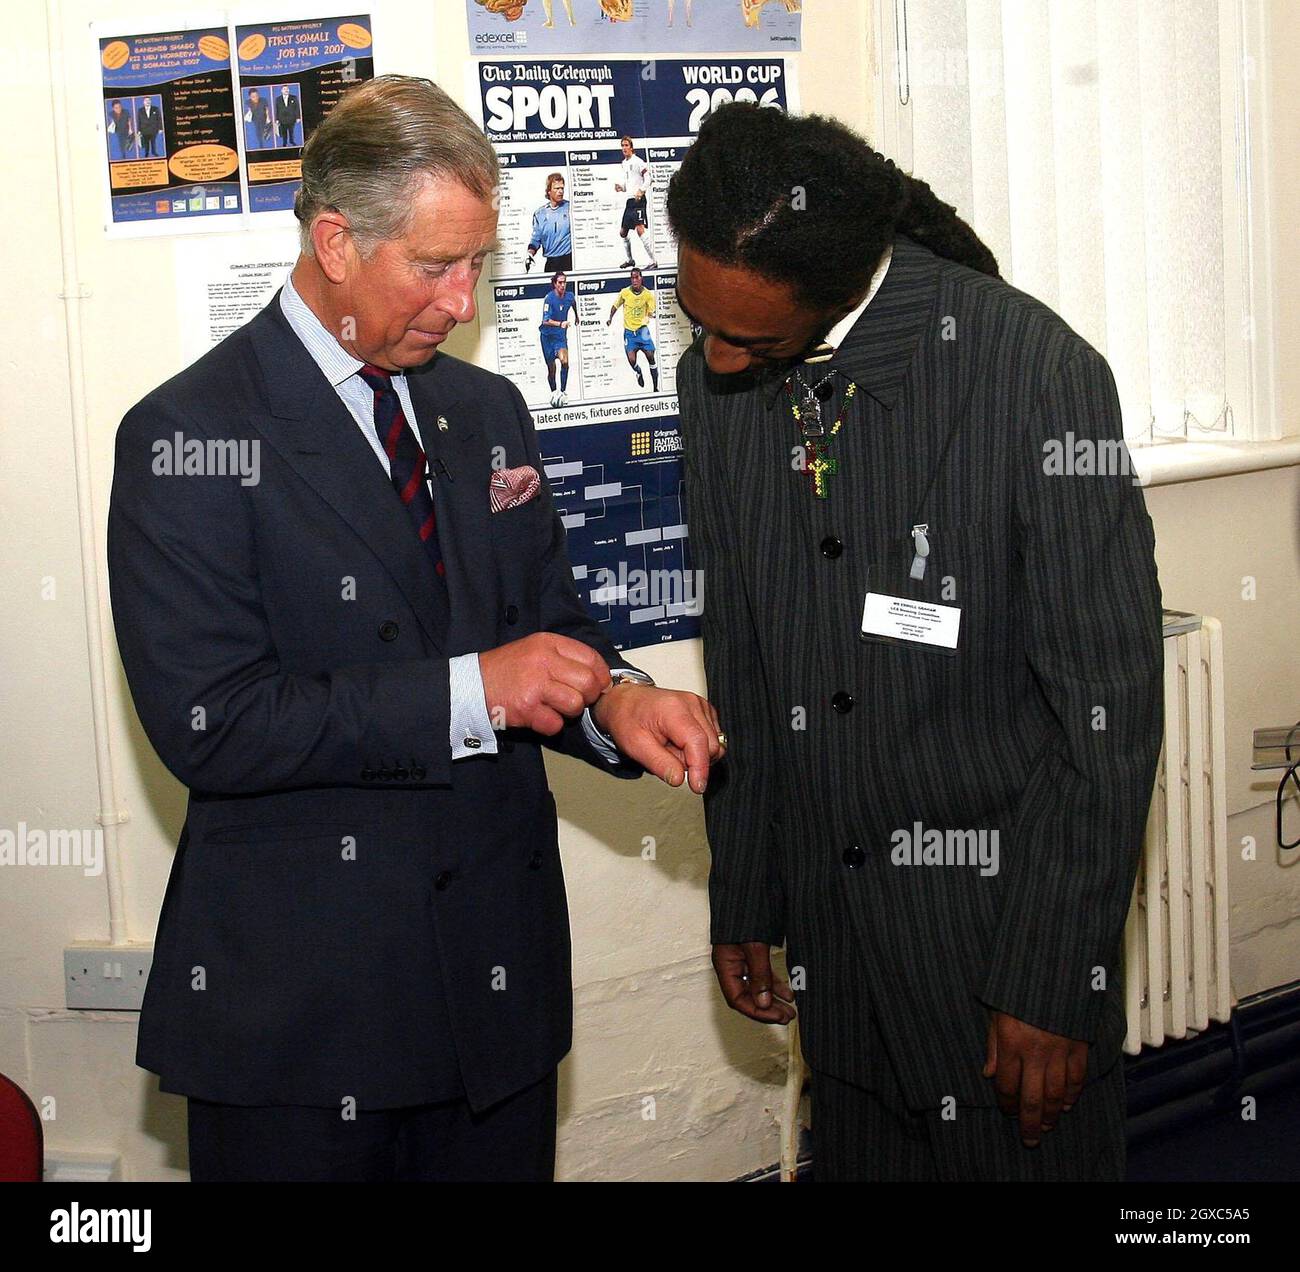 Prince Charles, Prince of Wales meets Erol Graham, one of the first recipients of the Prince's Trust Award 30 years ago, in Toxteth Town Hall community centre, Liverpool on St. Georges's Day, April 23, 2007. The Prince was showing his watch, which, he told Mr Graham, was received as a gift from the Emperor of Ethiopia Haile Selassie. Stock Photo